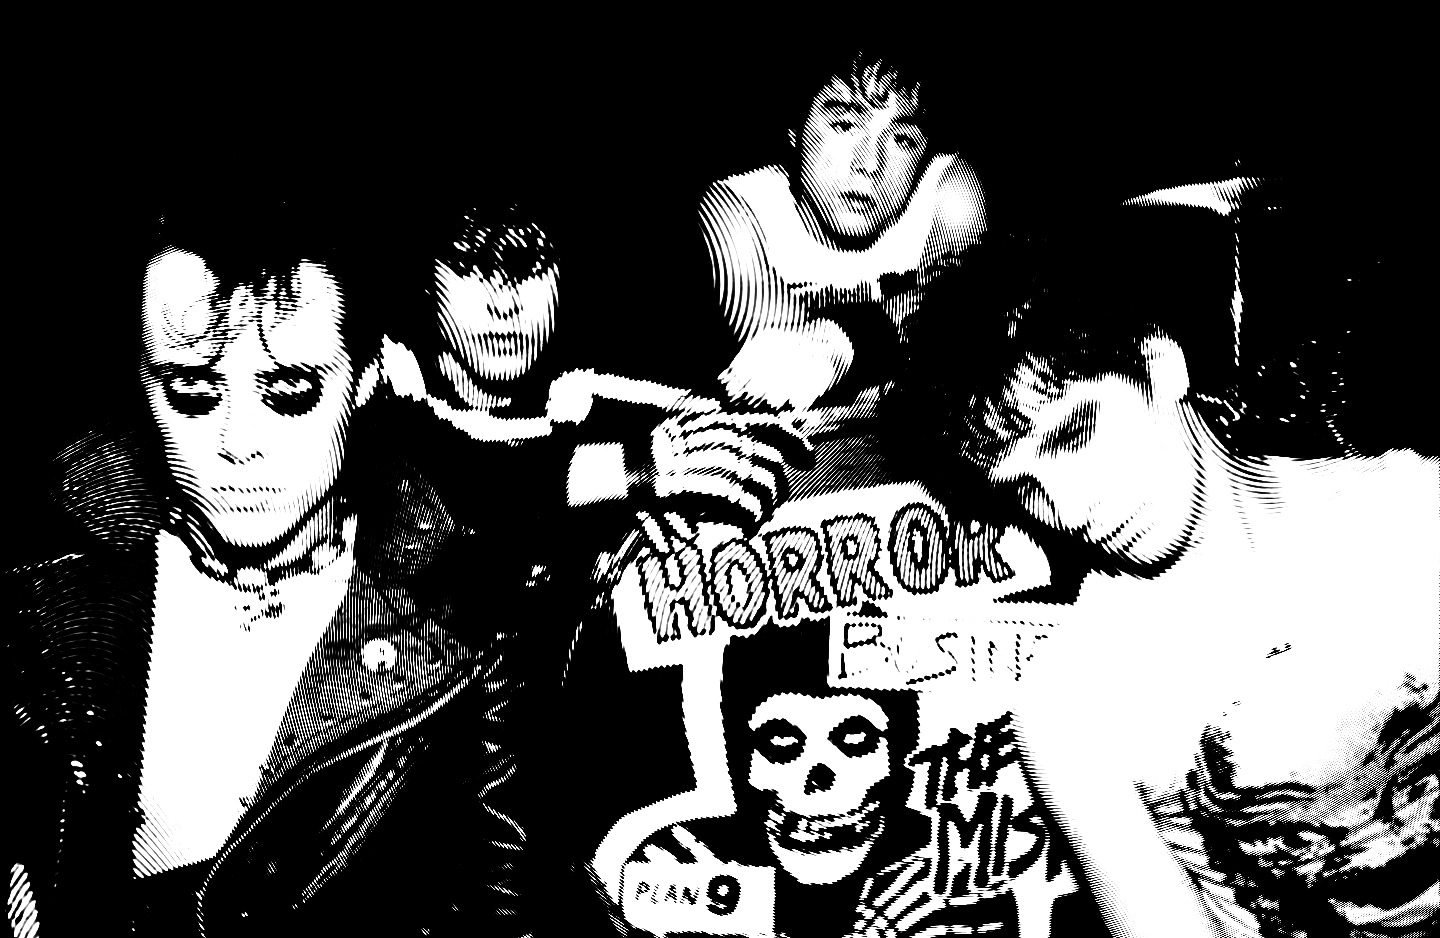 Sometimes Artists Get Worse (But Sometimes We Should Love Them Anyways): the Misfits—A Case Study | Features | LIVING LIFE FEARLESS